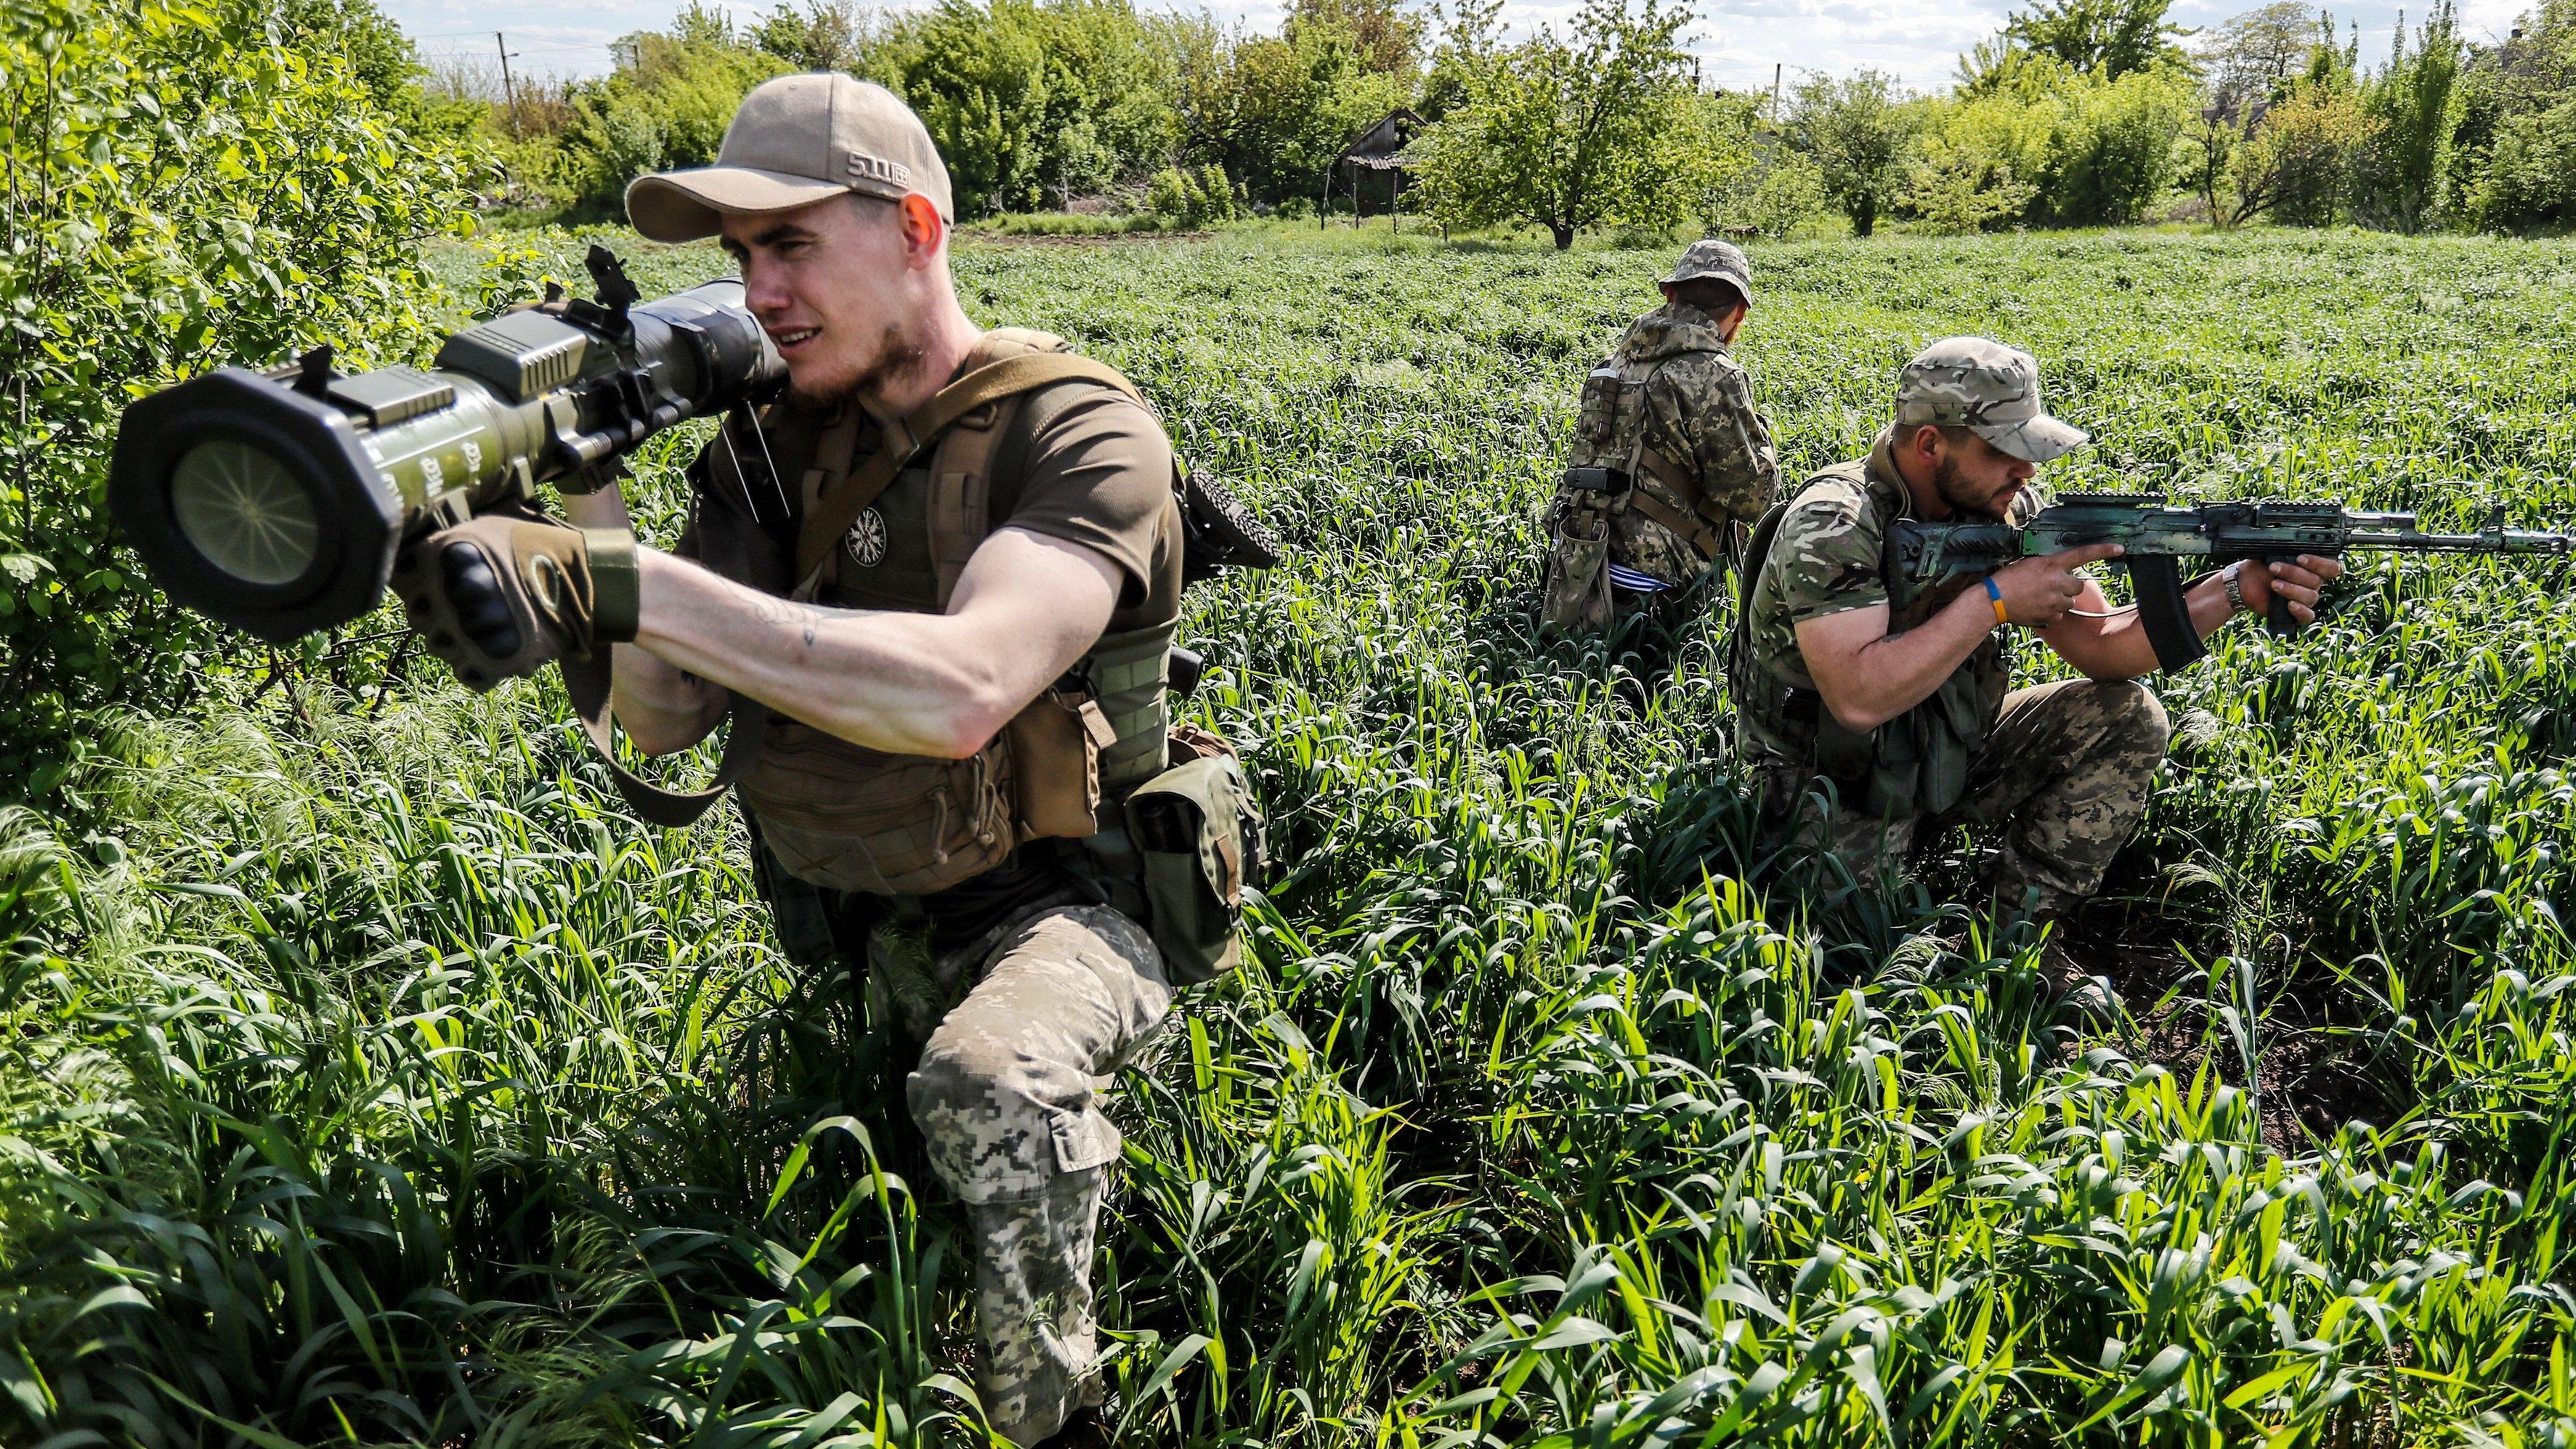 Ukrainian soldiers on an intelligence-gathering mission in Donetsk, Donbas, in the spring. The defenders hope now to turn Russian out of territories in the south of the country